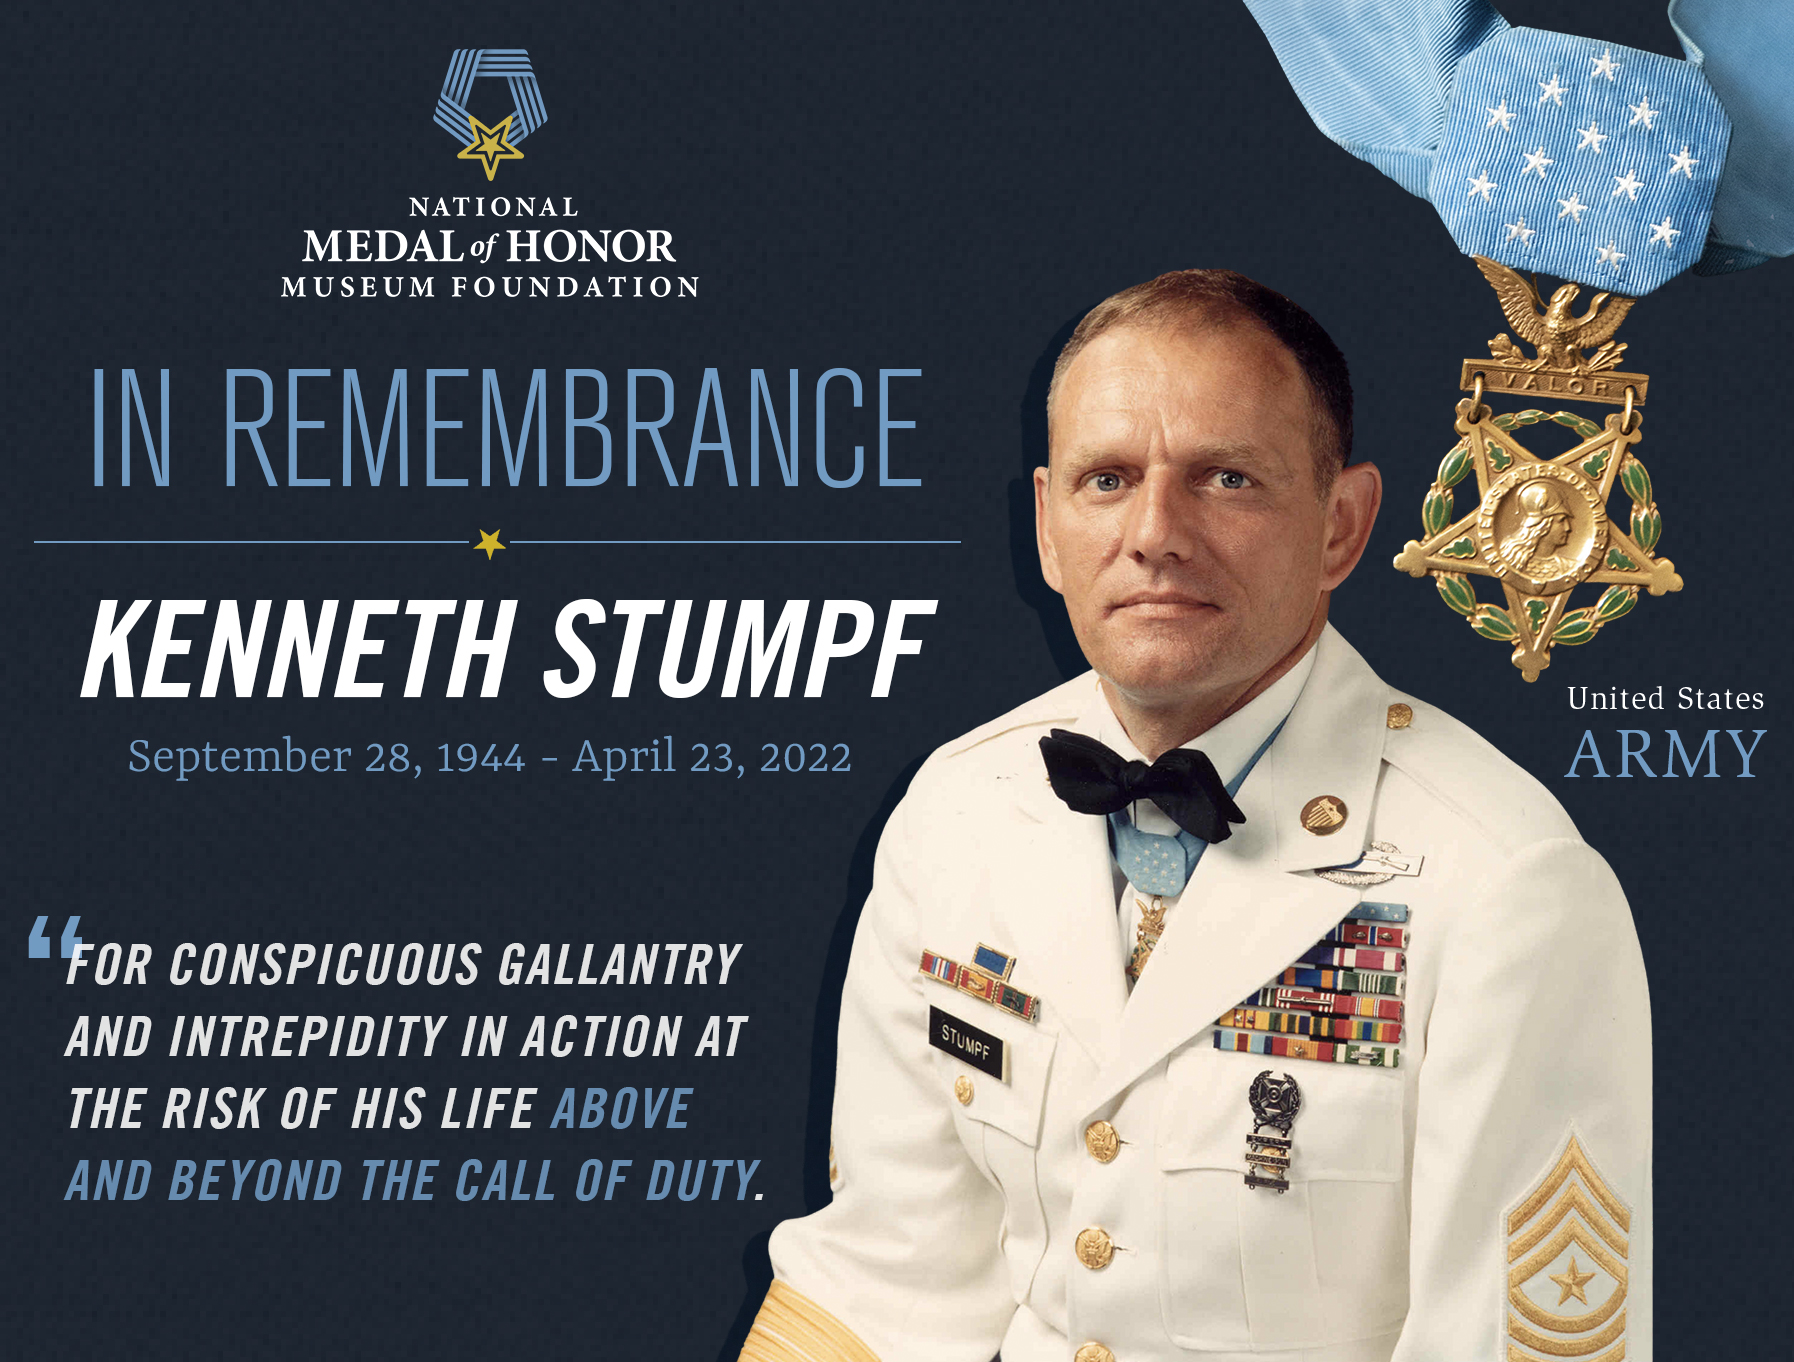 Medal of Honor recipient lost right hand, saved lives